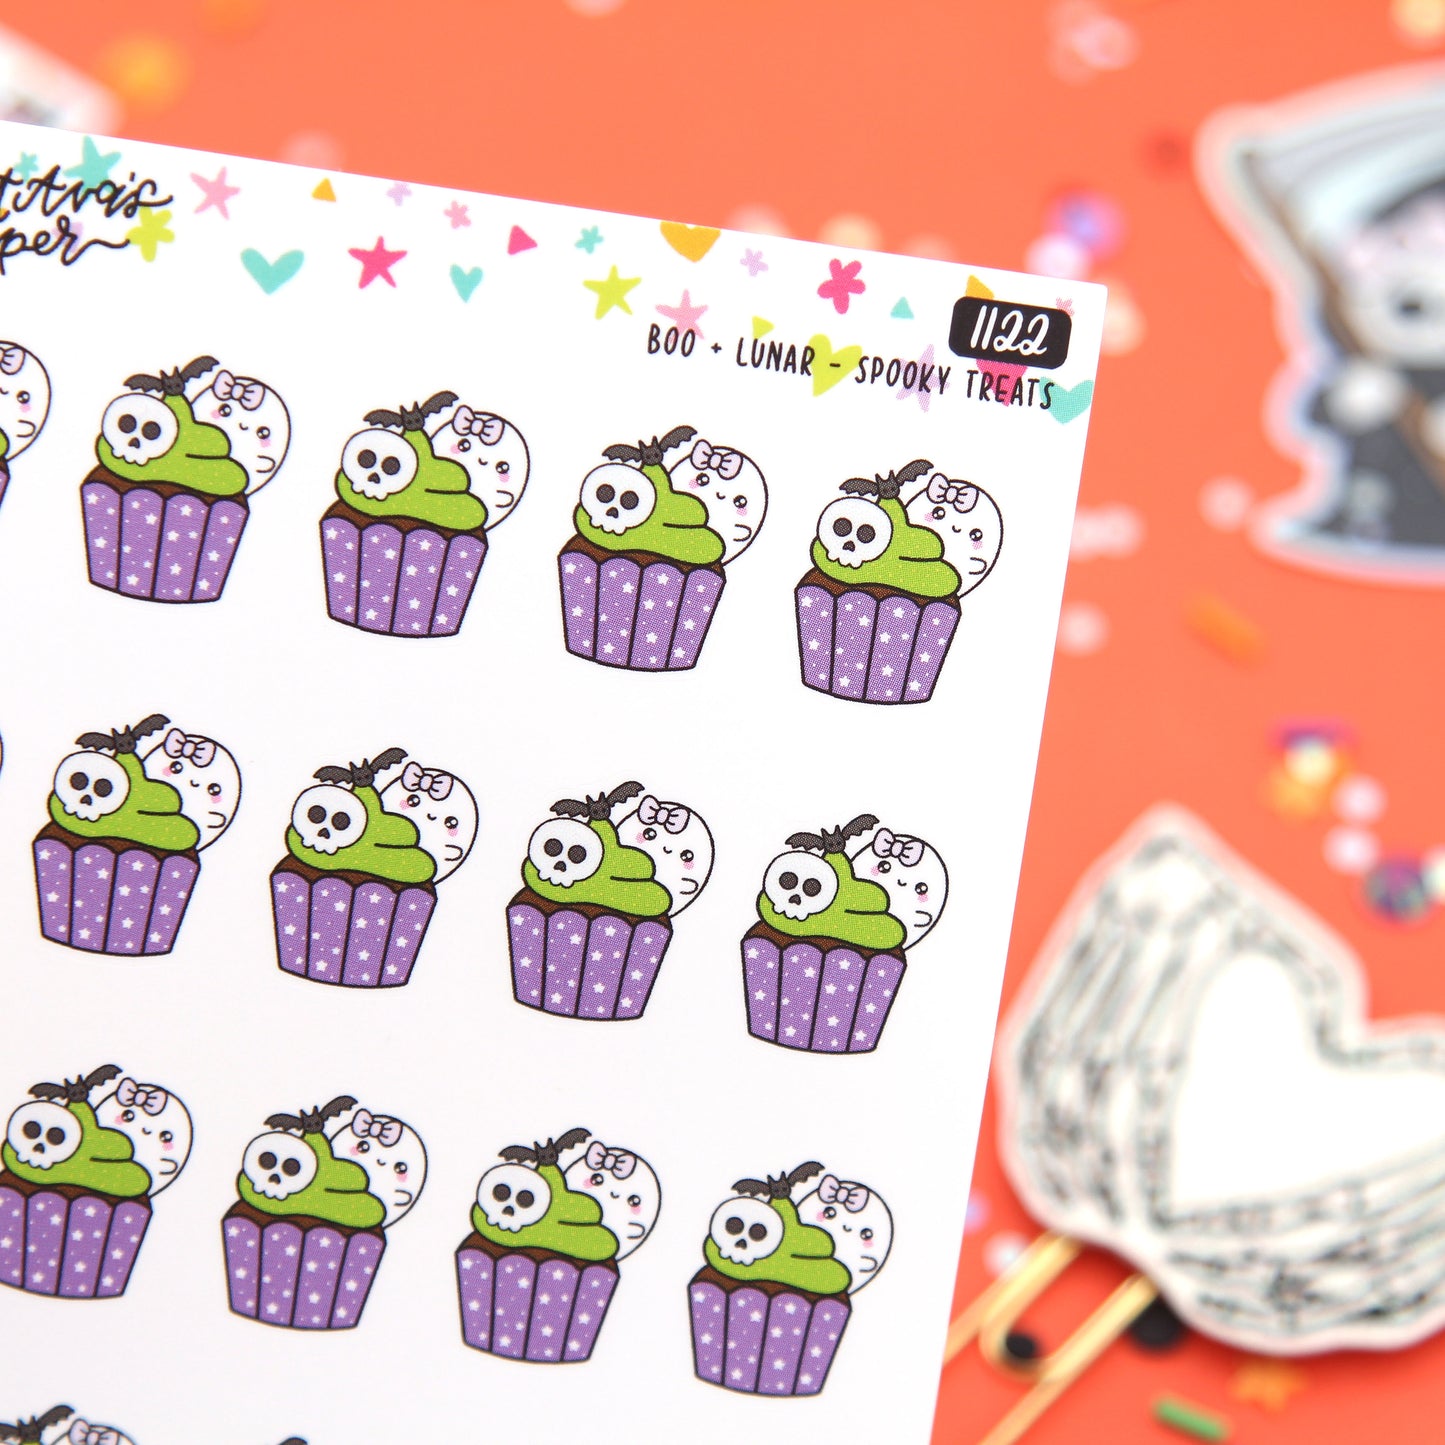 Spooky Cupcake Planning Planner Stickers - Boo and Lunar [1122]